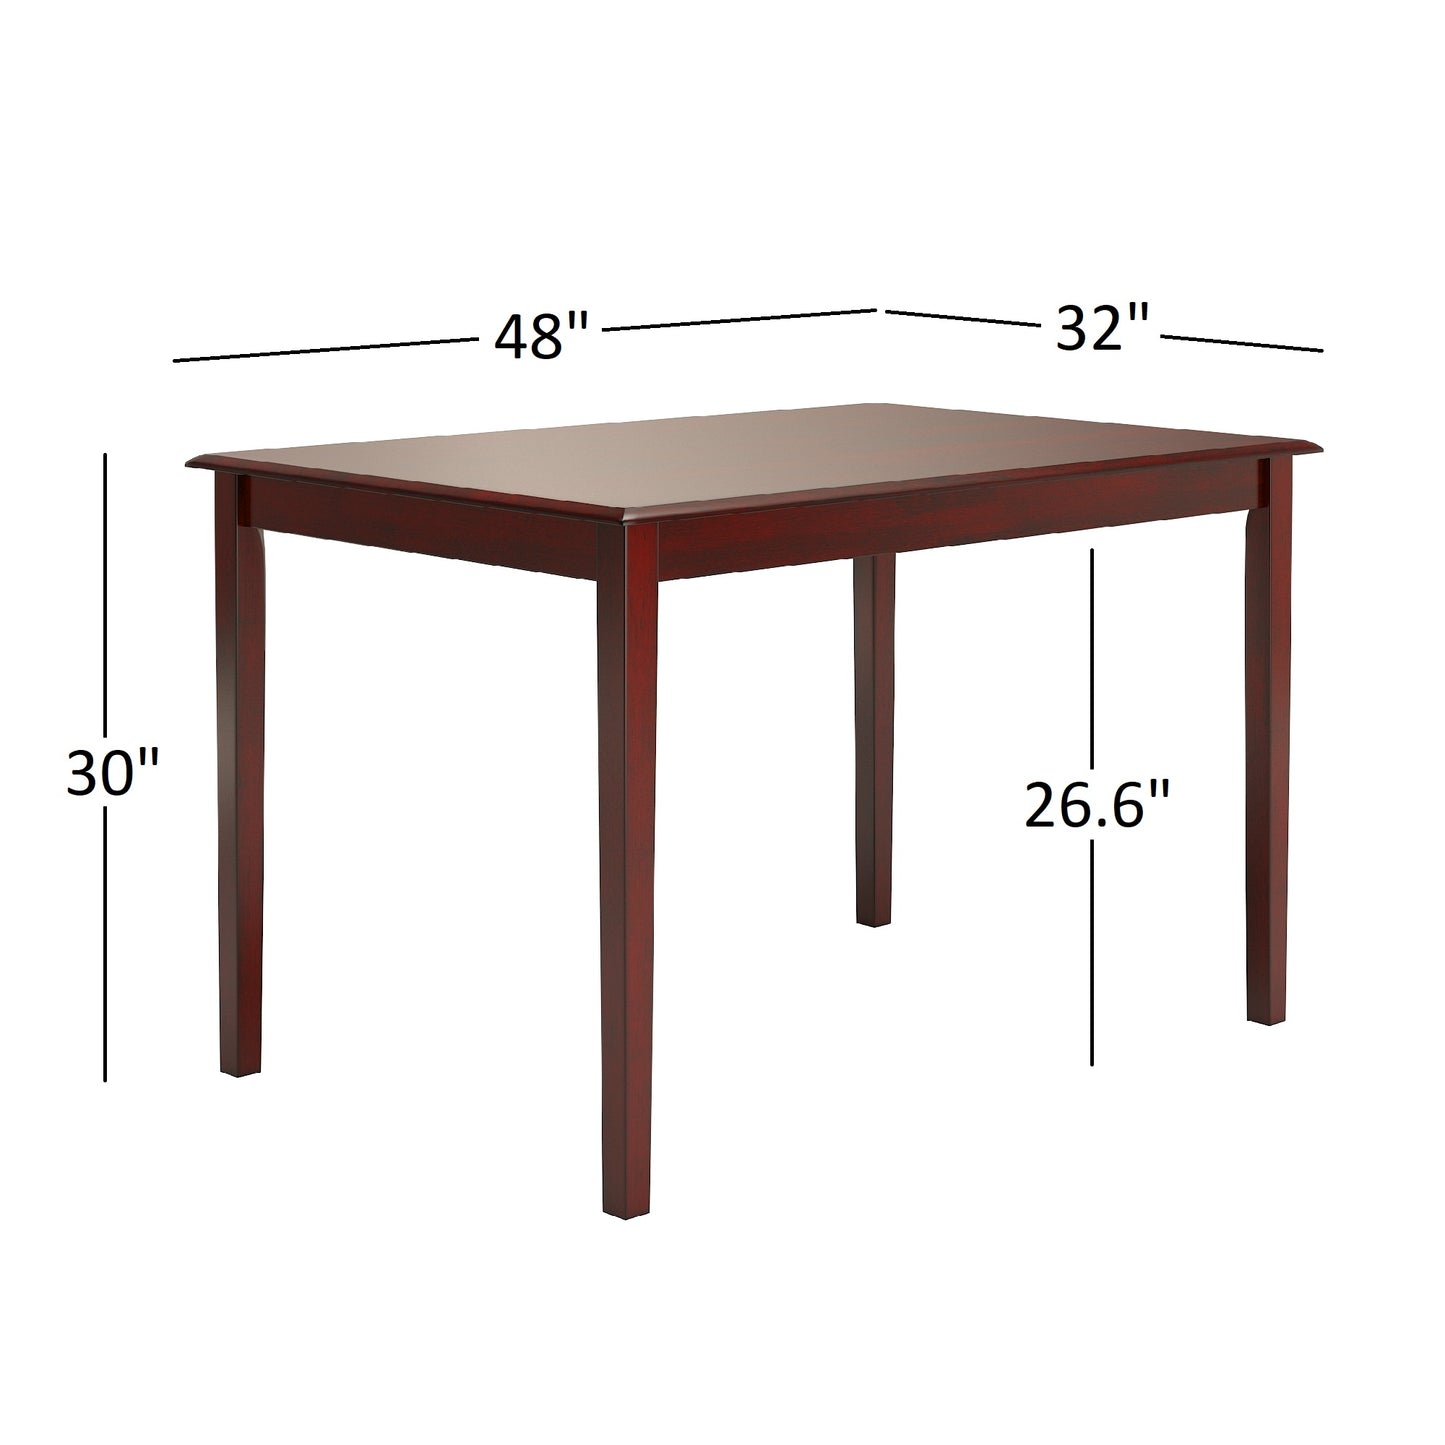 Wood 5-Piece Breakfast Nook Set - Antique Berry Red Finish, Ladder Back, Rectangular Table